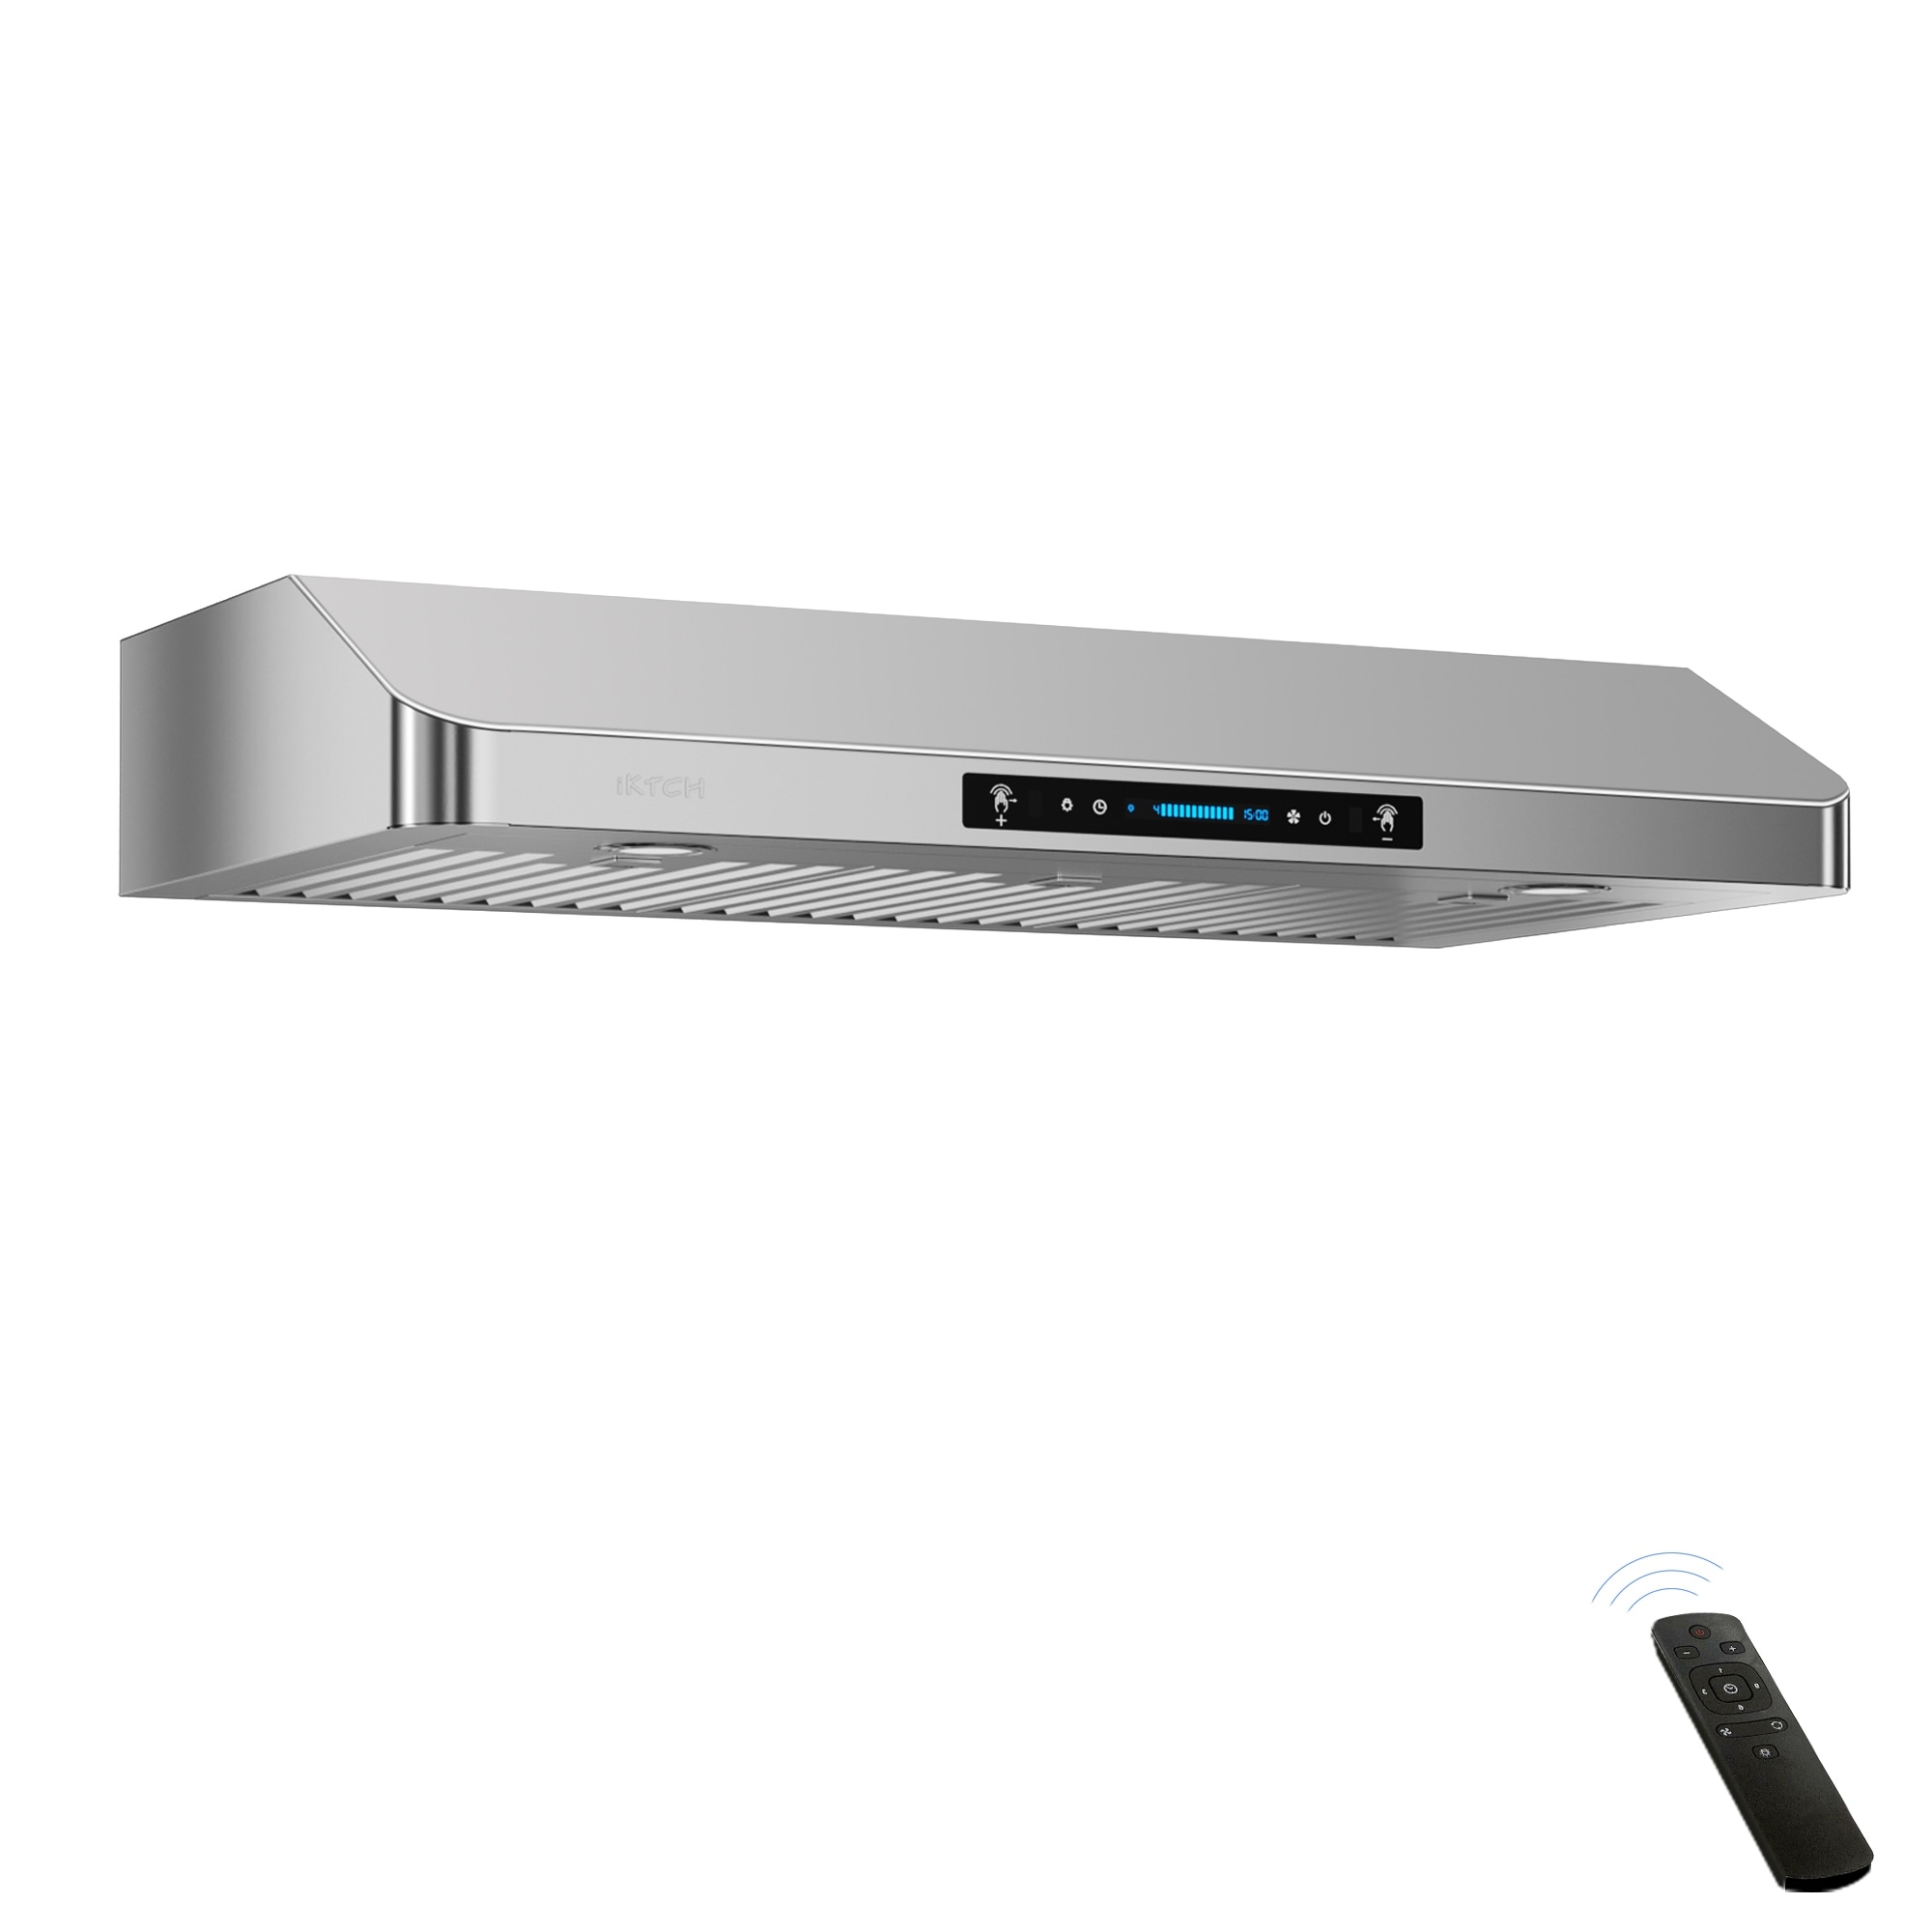  IKTCH 30 Inch Built-in/Insert Range Hood 900 CFM,  Ducted/Ductless Convertible Duct, Stainless Steel Kitchen Vent Hood